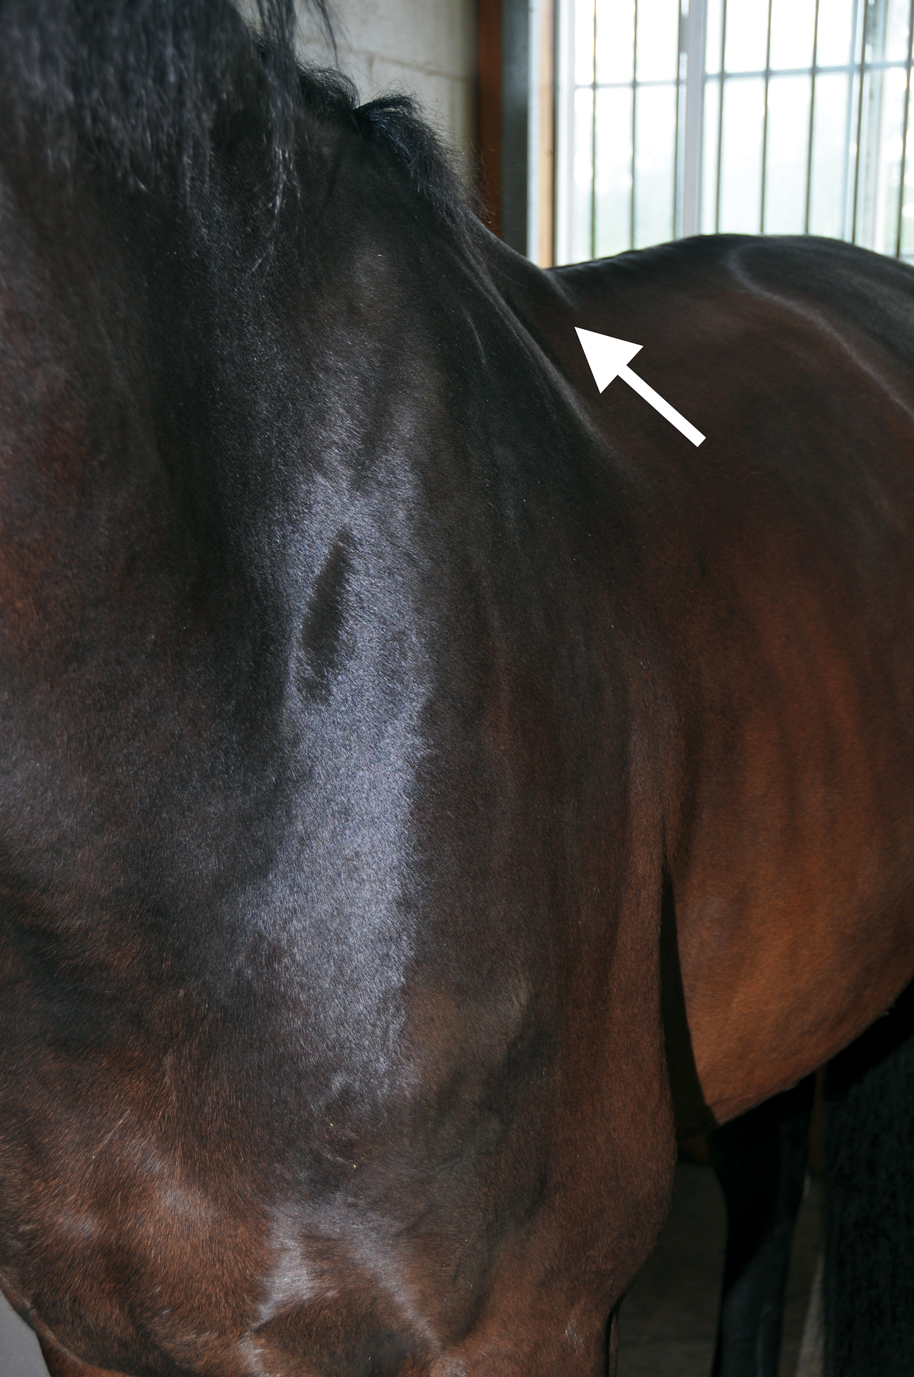 The trapezius muscle can be inflamed from an incorrectly angled tree point/gullet, resulting in this bulge and nearby hollow behind the withers.